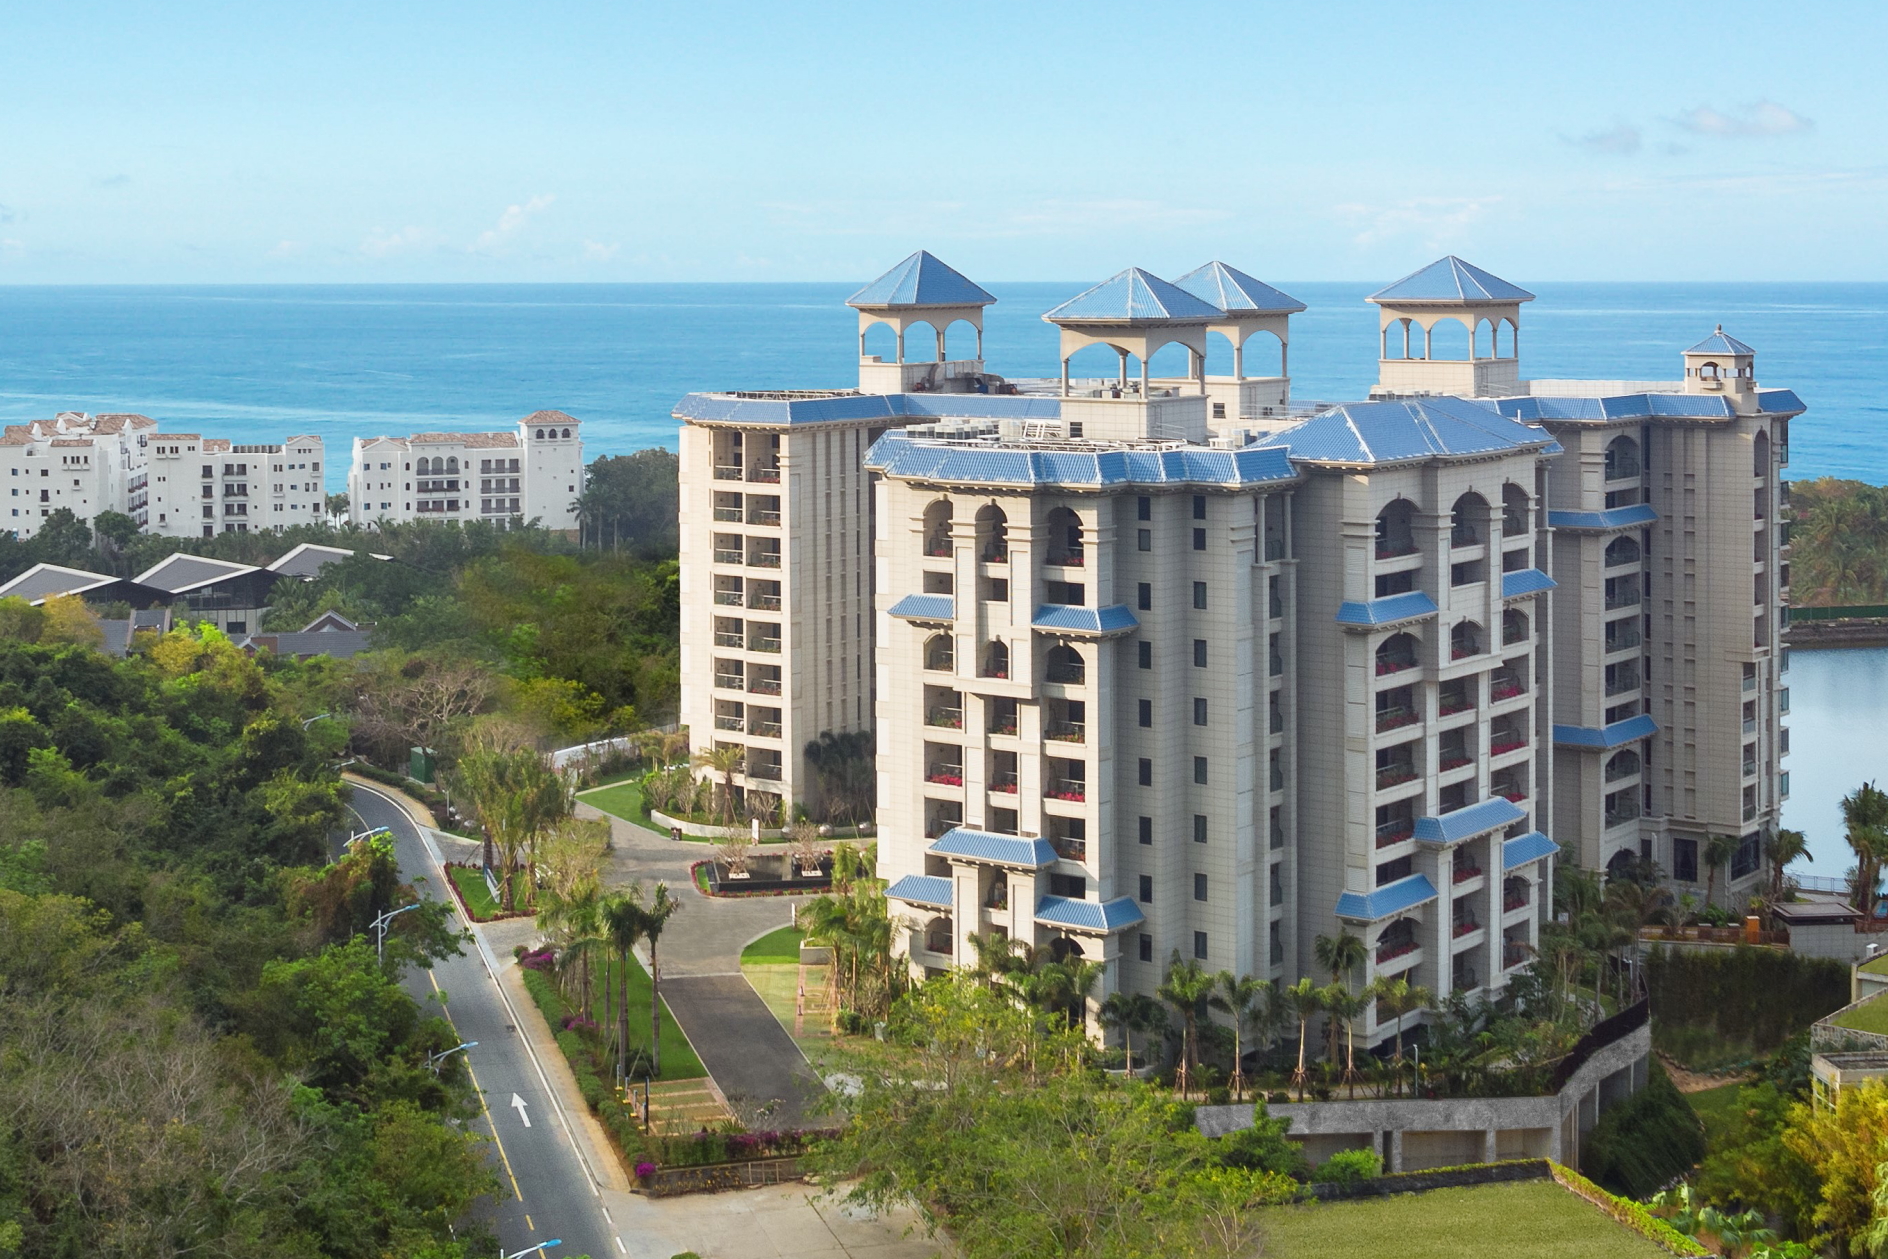 Onyx Hospitality has expanded its portfolio of hotels in China, with the opening of the 285-key Shama Yalong Bay Sanya, the group's first Shama resort. Click to enlarge.